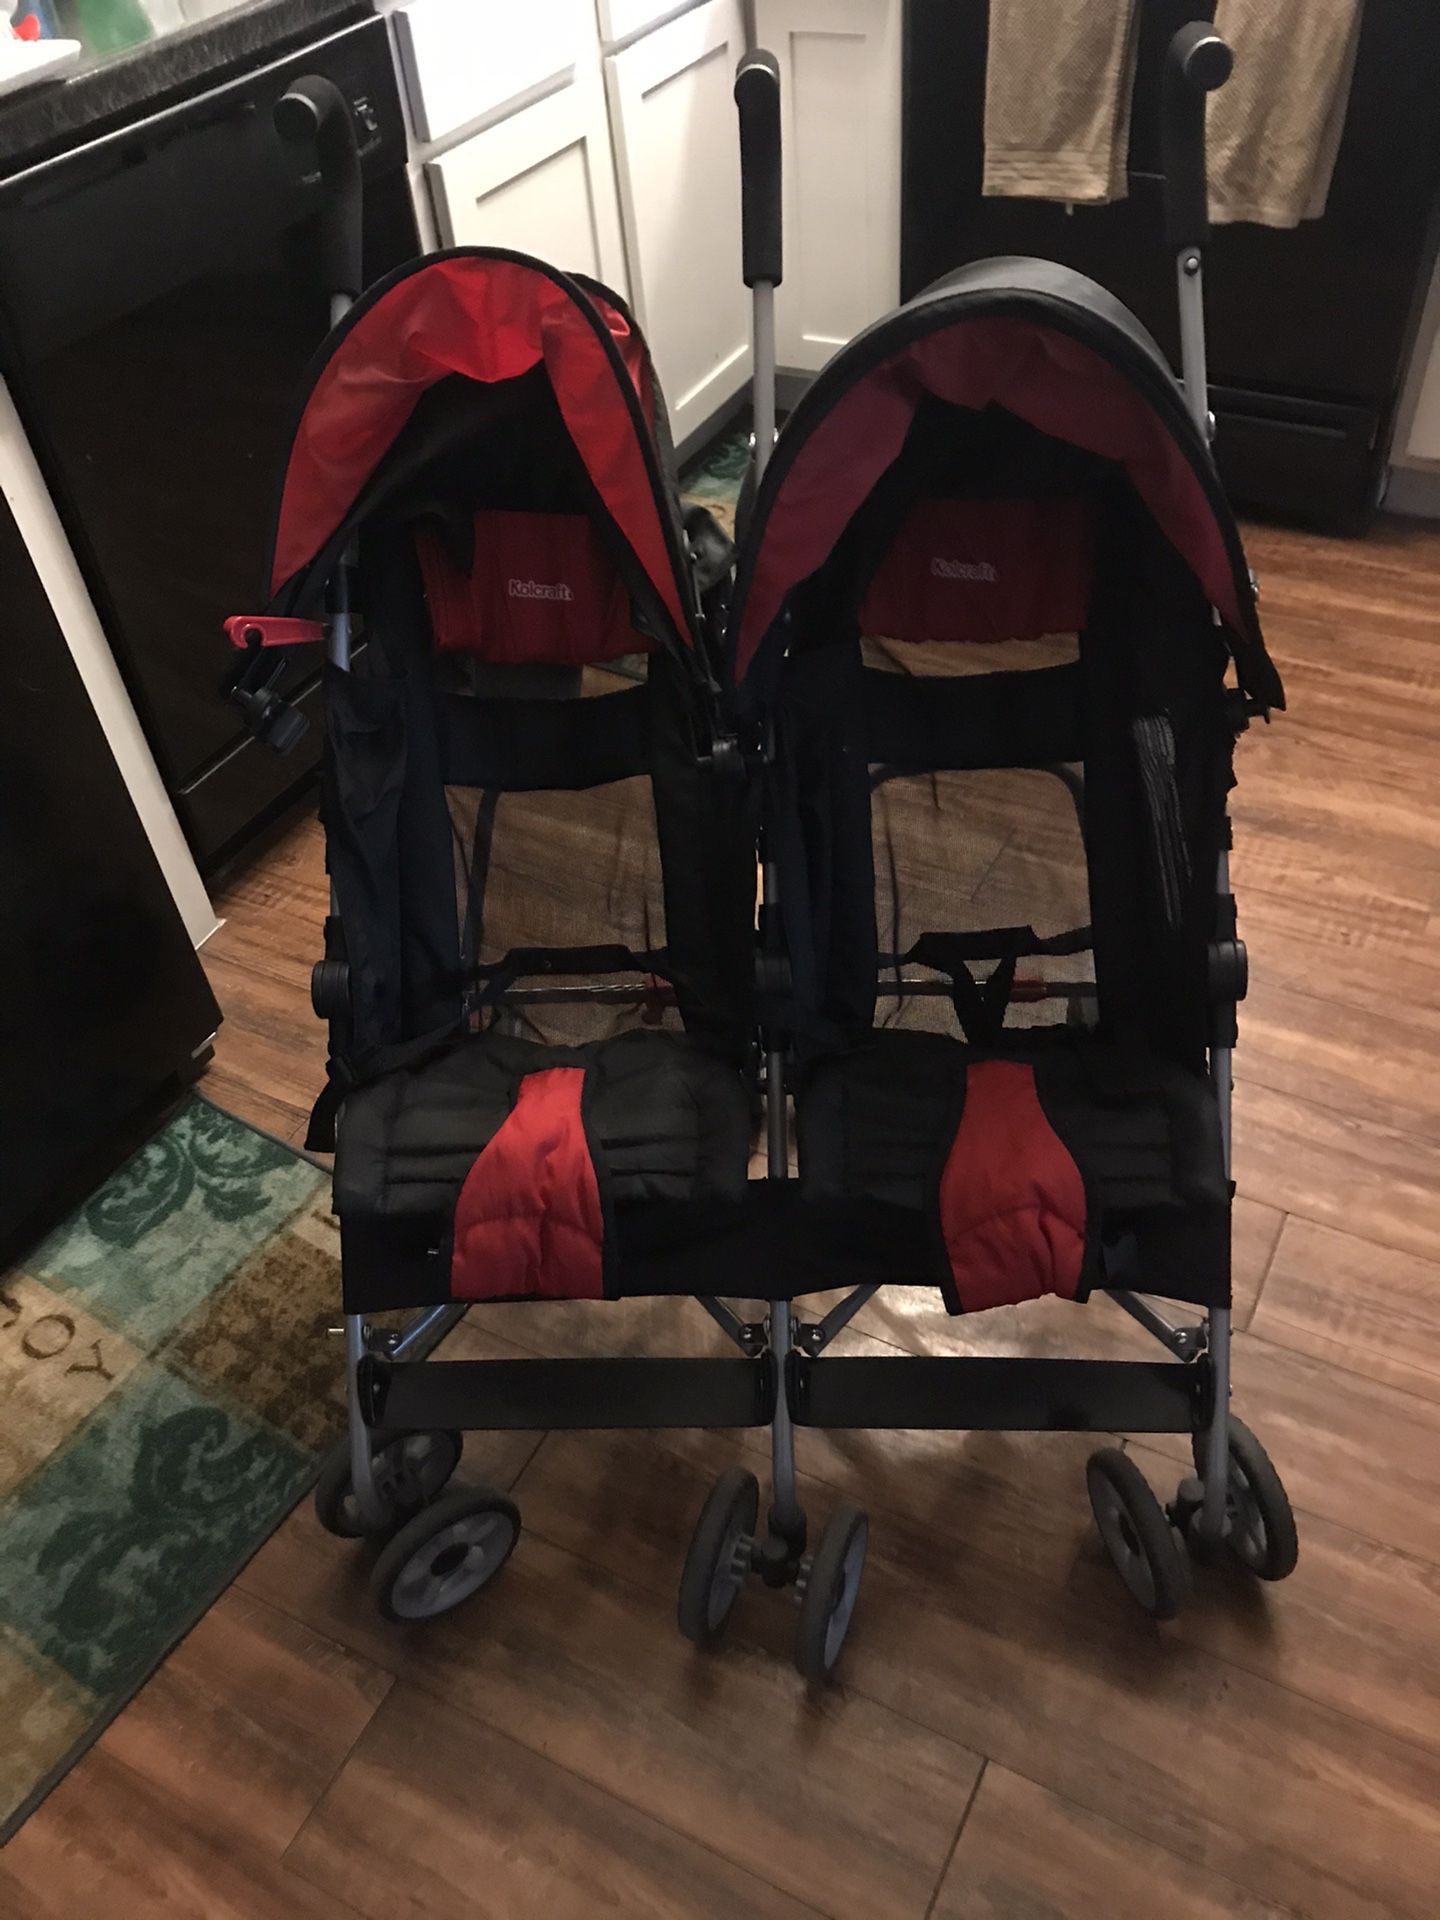 Kolcraft double stroller in excellent condition